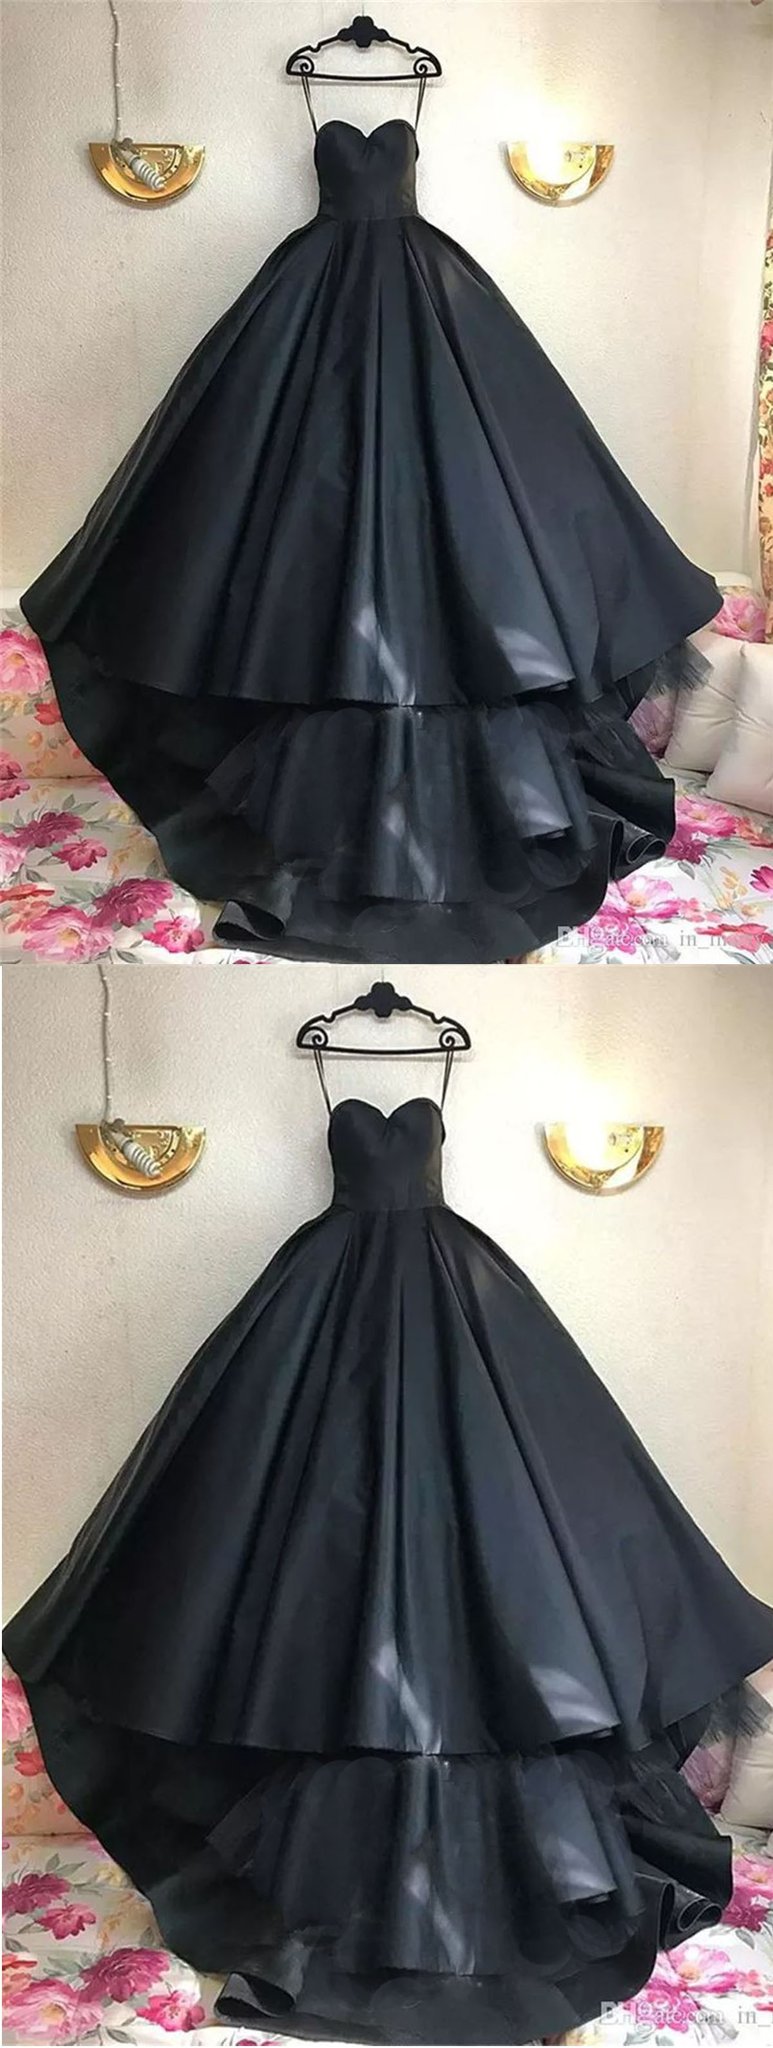 Black Prom Dresses Ball Gown Sweetheart Sweep Train Sexy Prom Dress Long Evening Dress,Black Satin Pricess Prom Dresses, Custom Made Party Gowns .